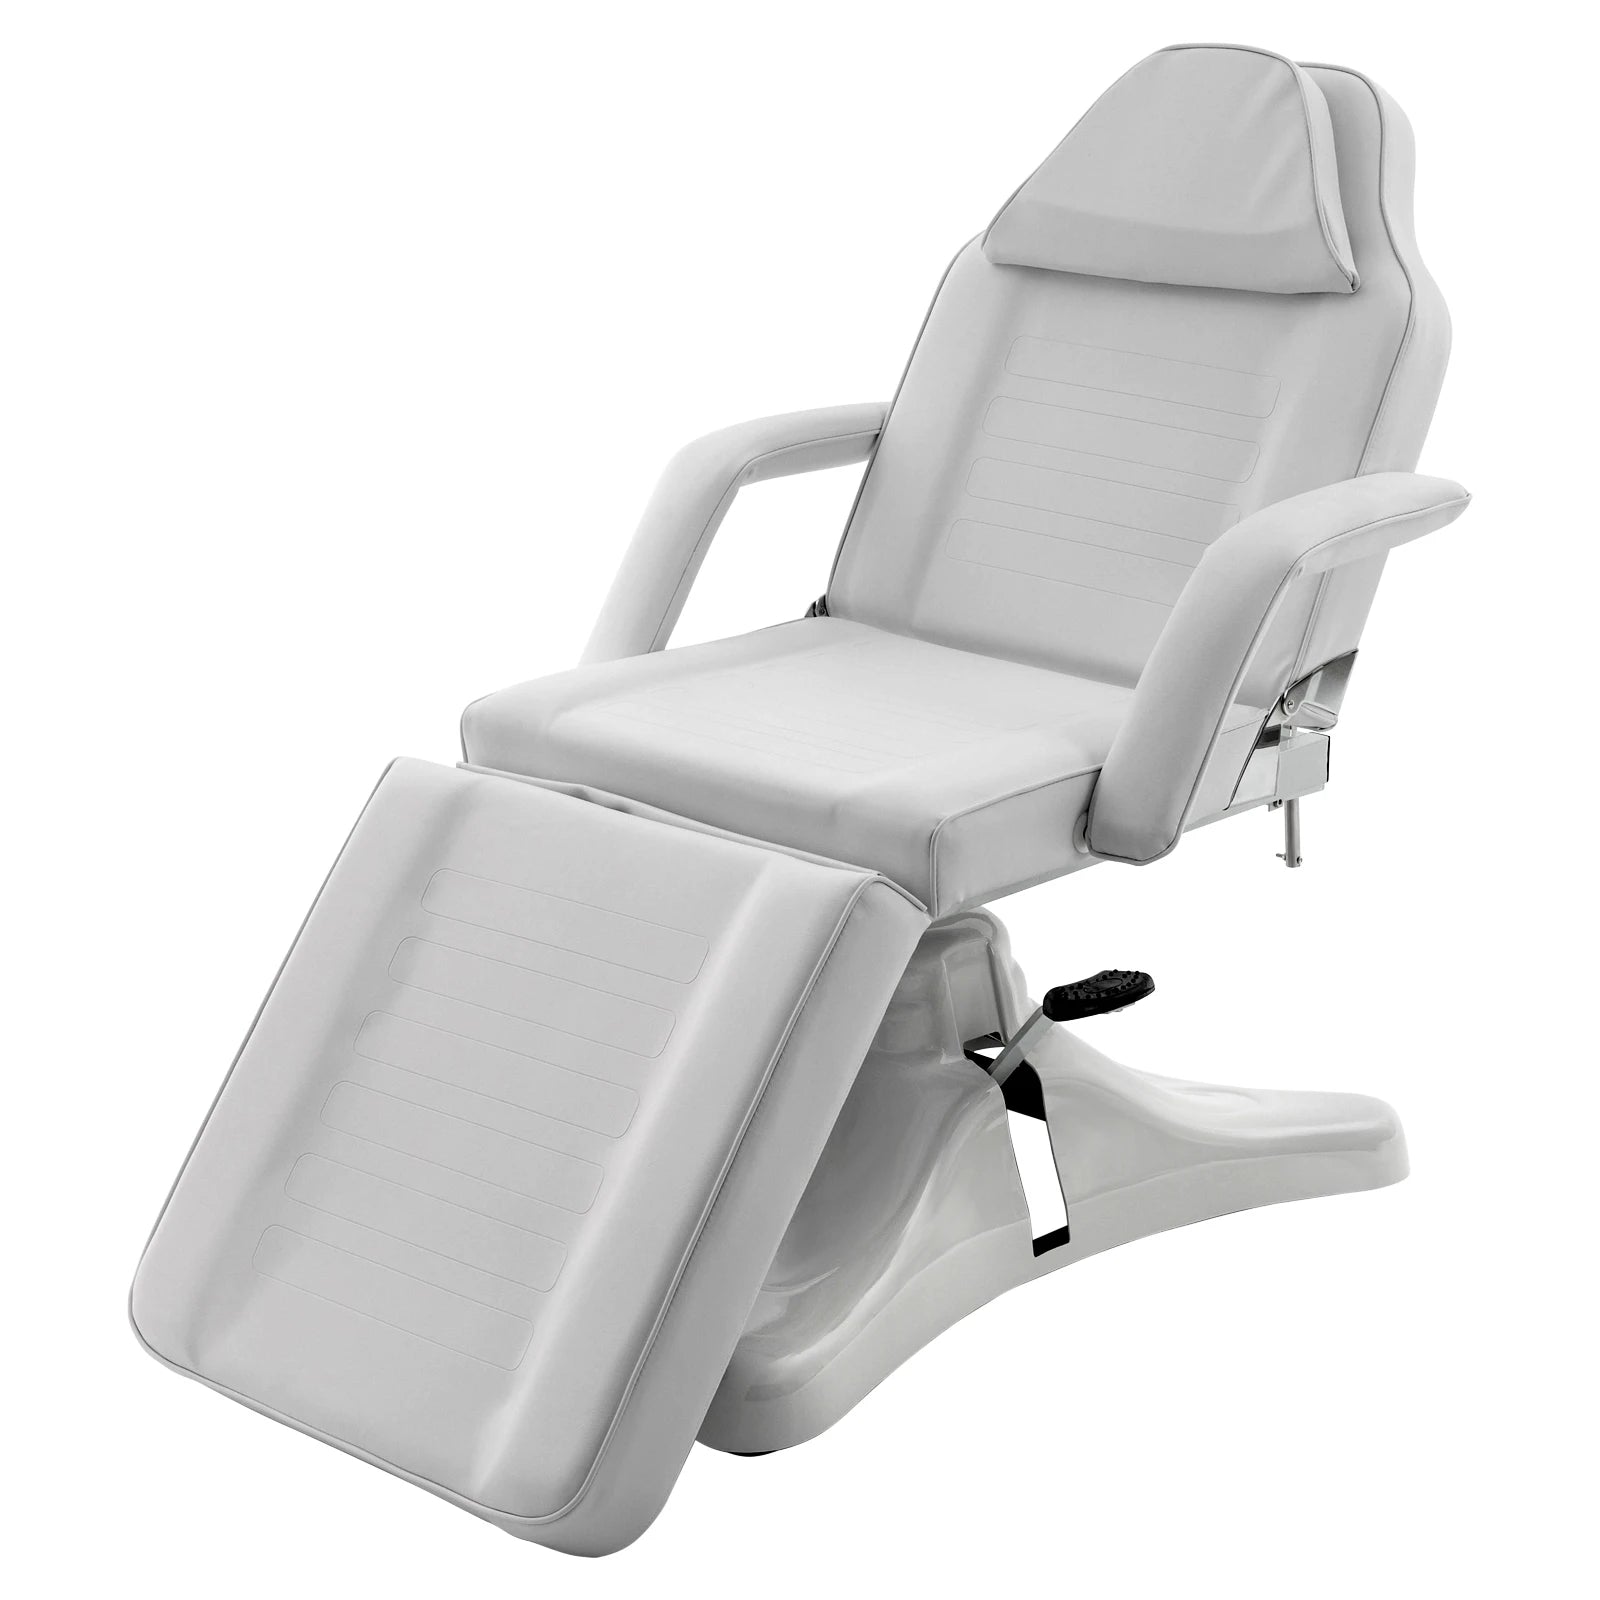 360° Rotating Hydraulic Tattoo Chair Table - Adjustable Height Facial Bed for Clients